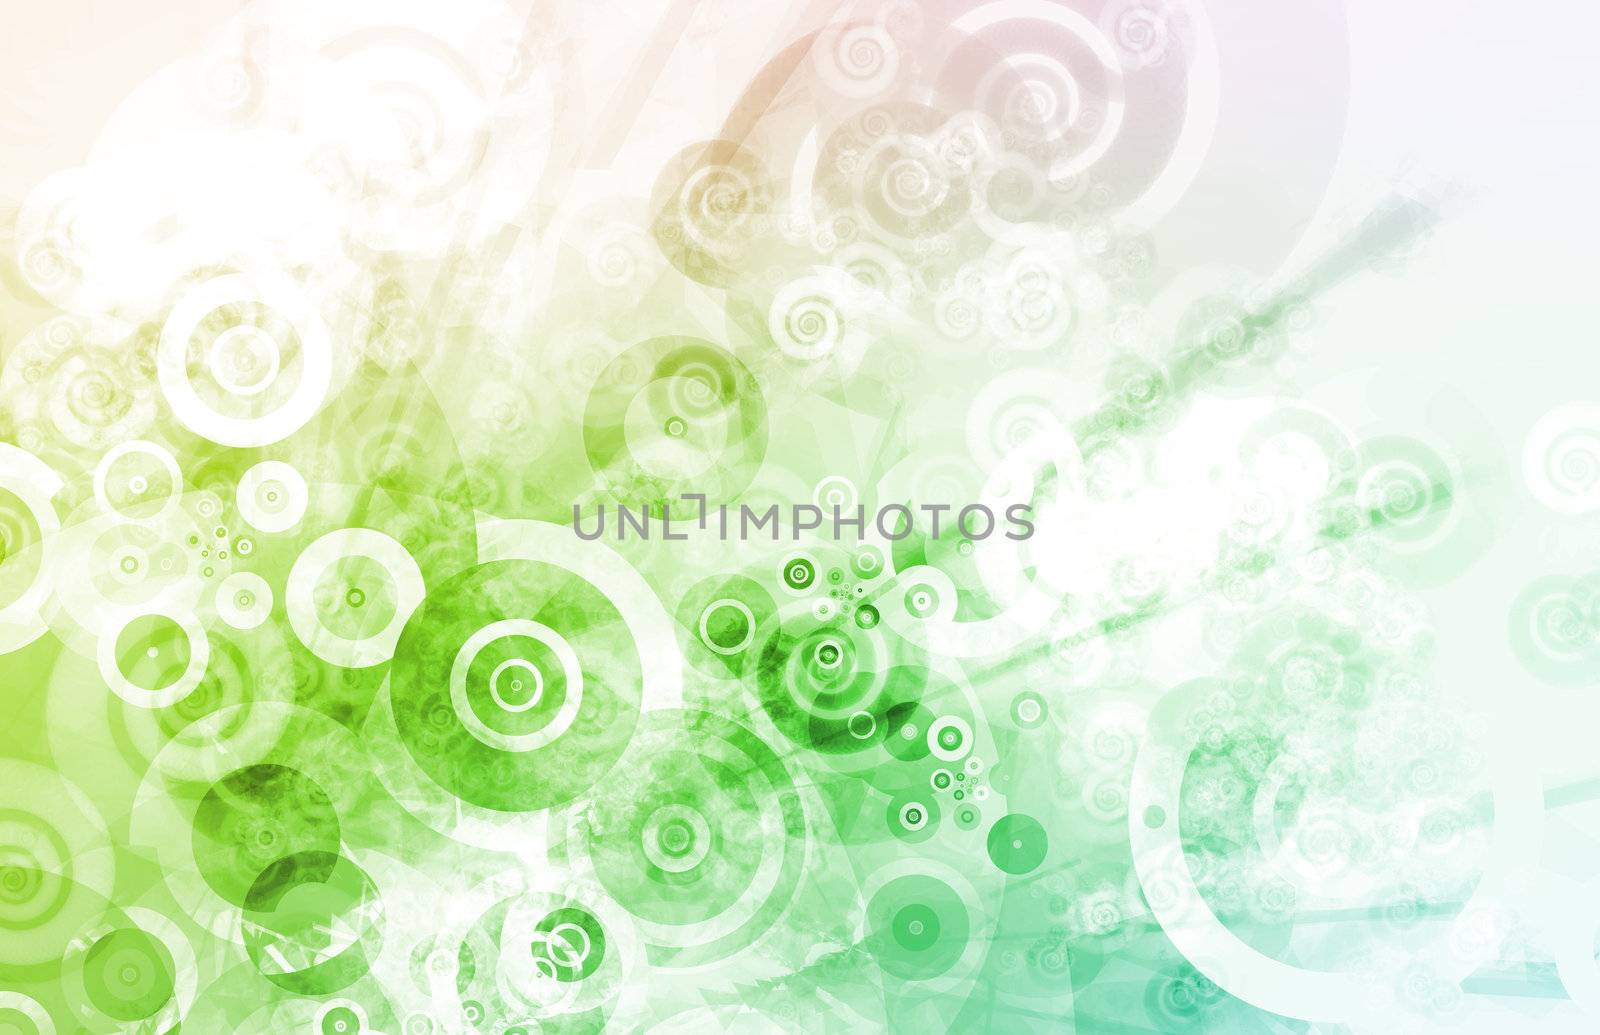 Modern Abstract Background with Many Circles Art